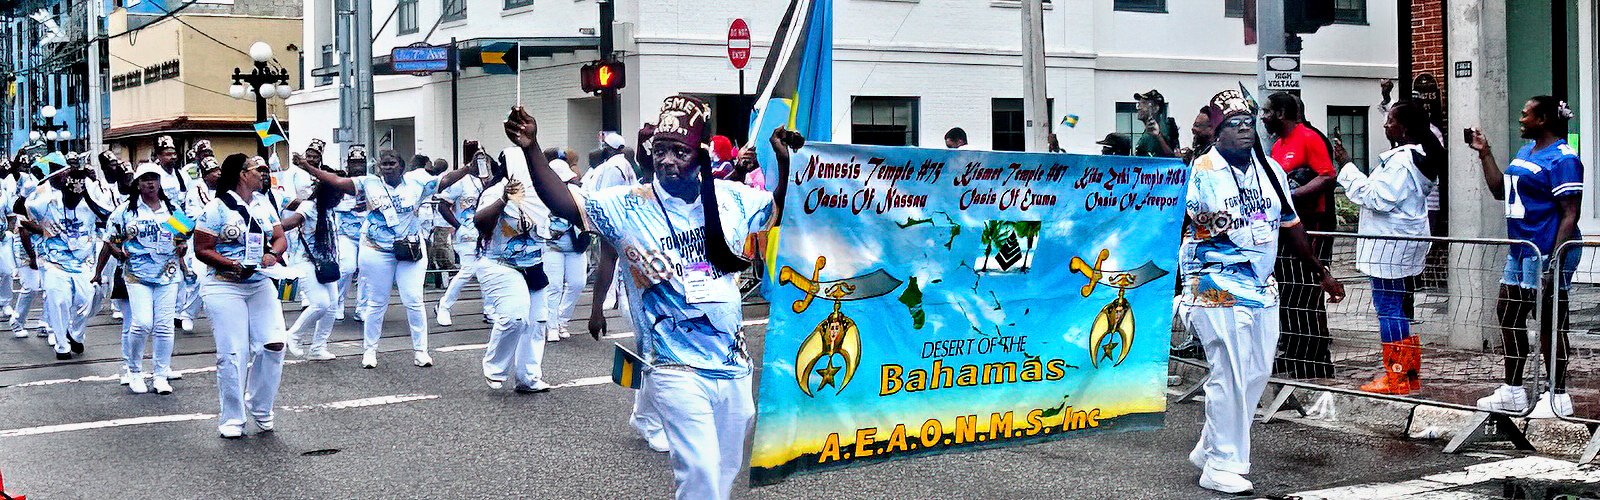 The Desert of the Bahamas is one of the more than 270 constituent temples of the Prince Hall Shrinedom throughout the world that have a collective membership of over 25,000.